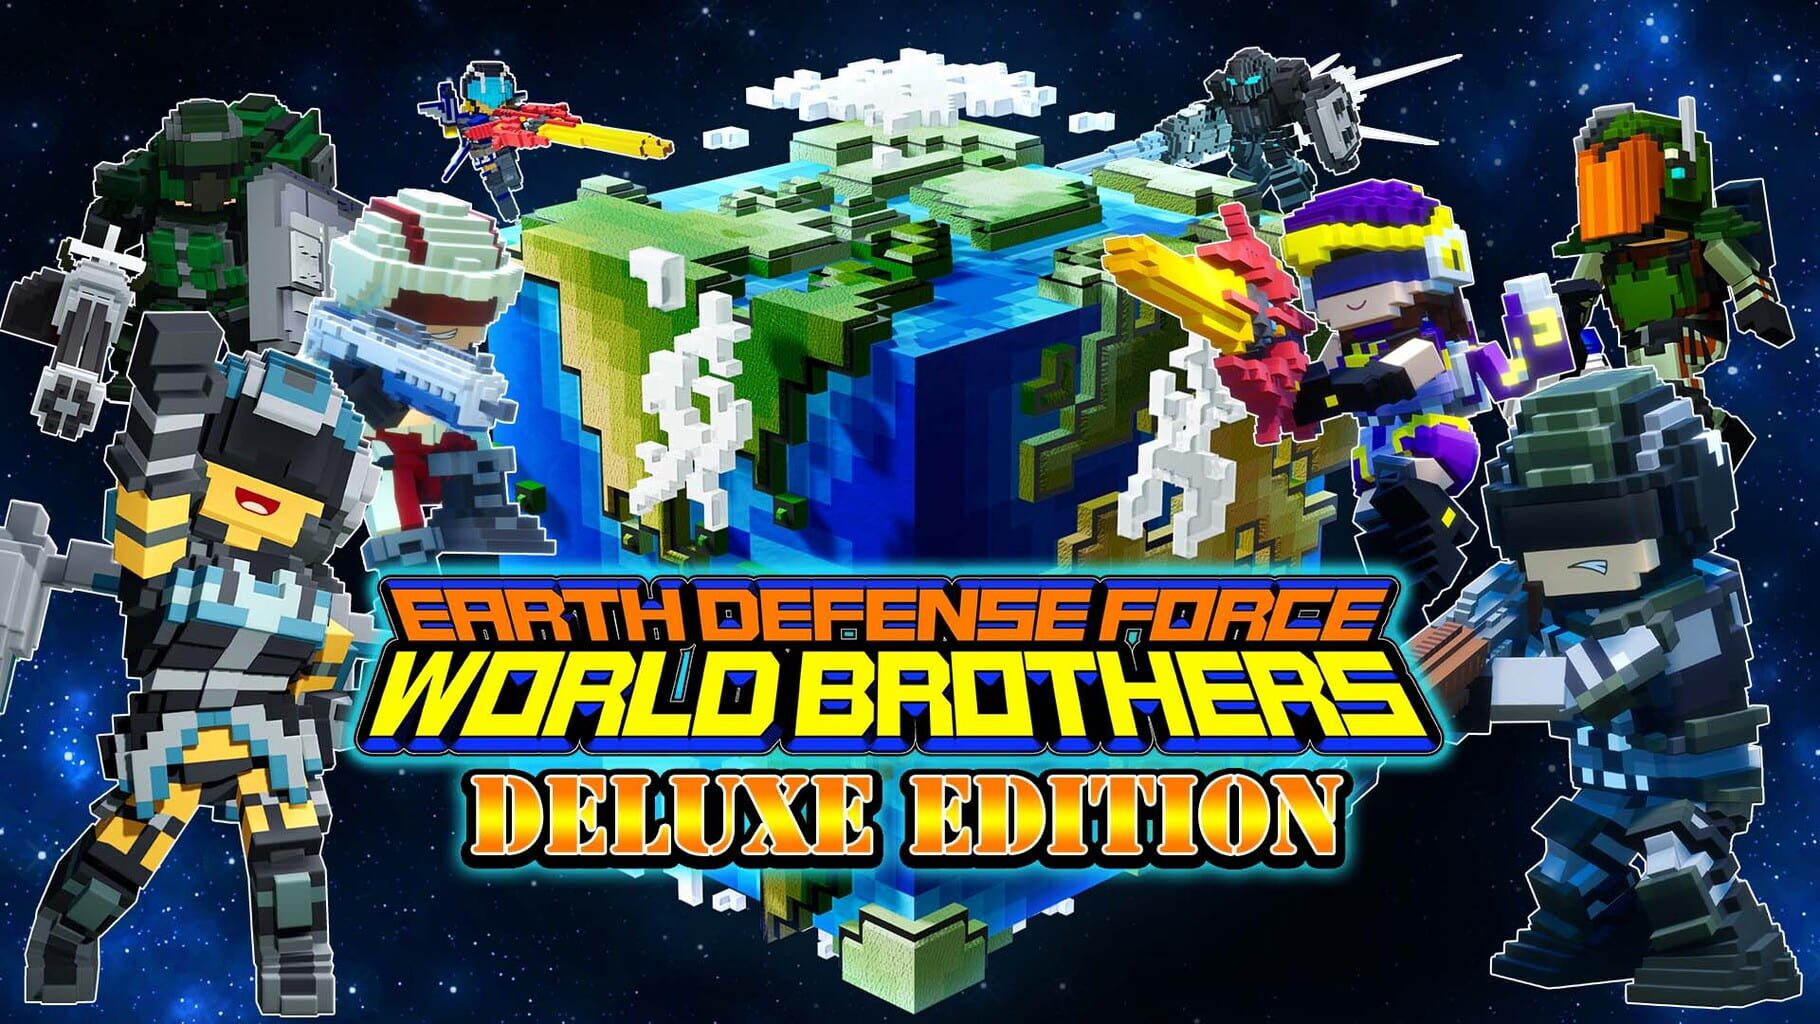 Earth Defense Force: World Brothers - Deluxe Edition artwork